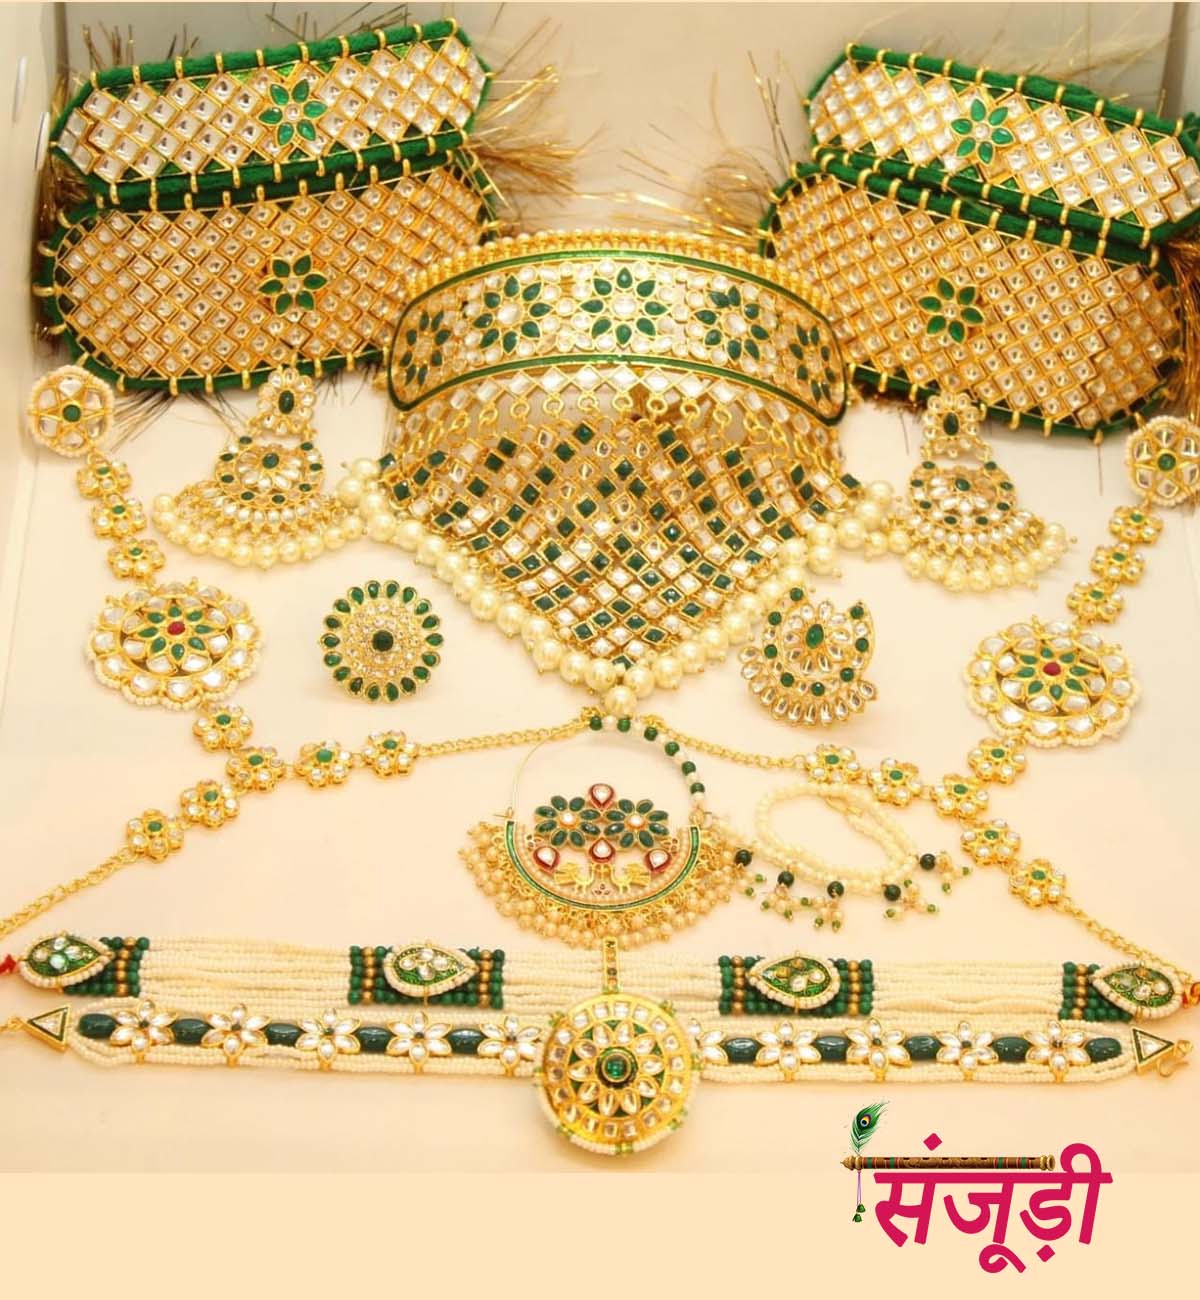 Rajasthani Bridal Jewellery Set in Green Colour with Bajuband